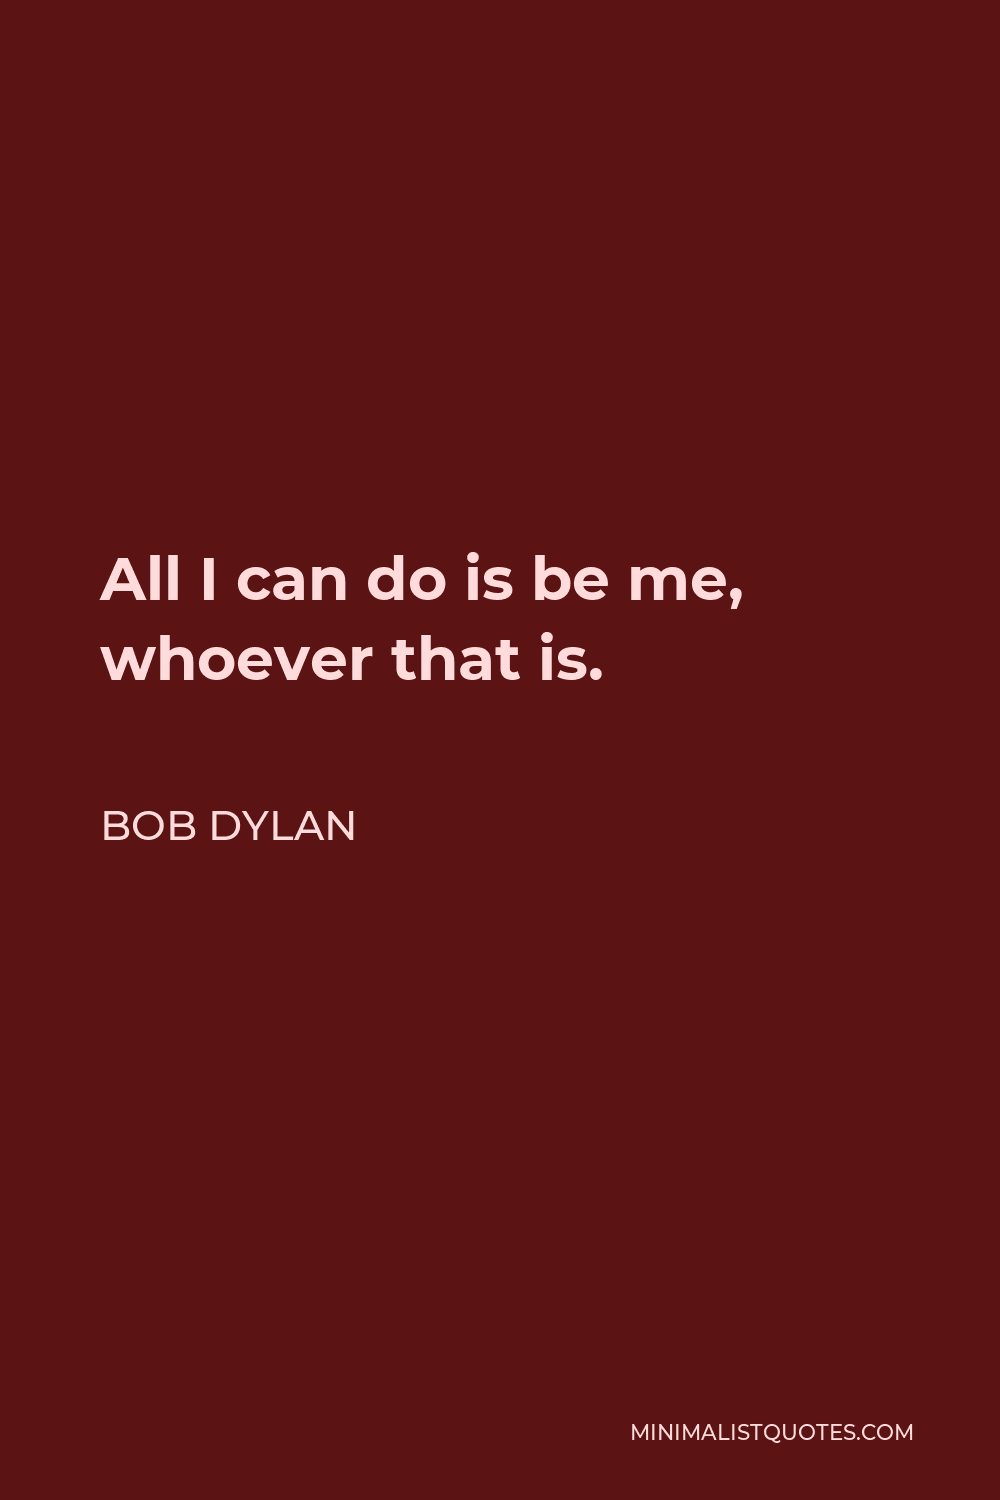 bob dylan quotes all i can do is be me